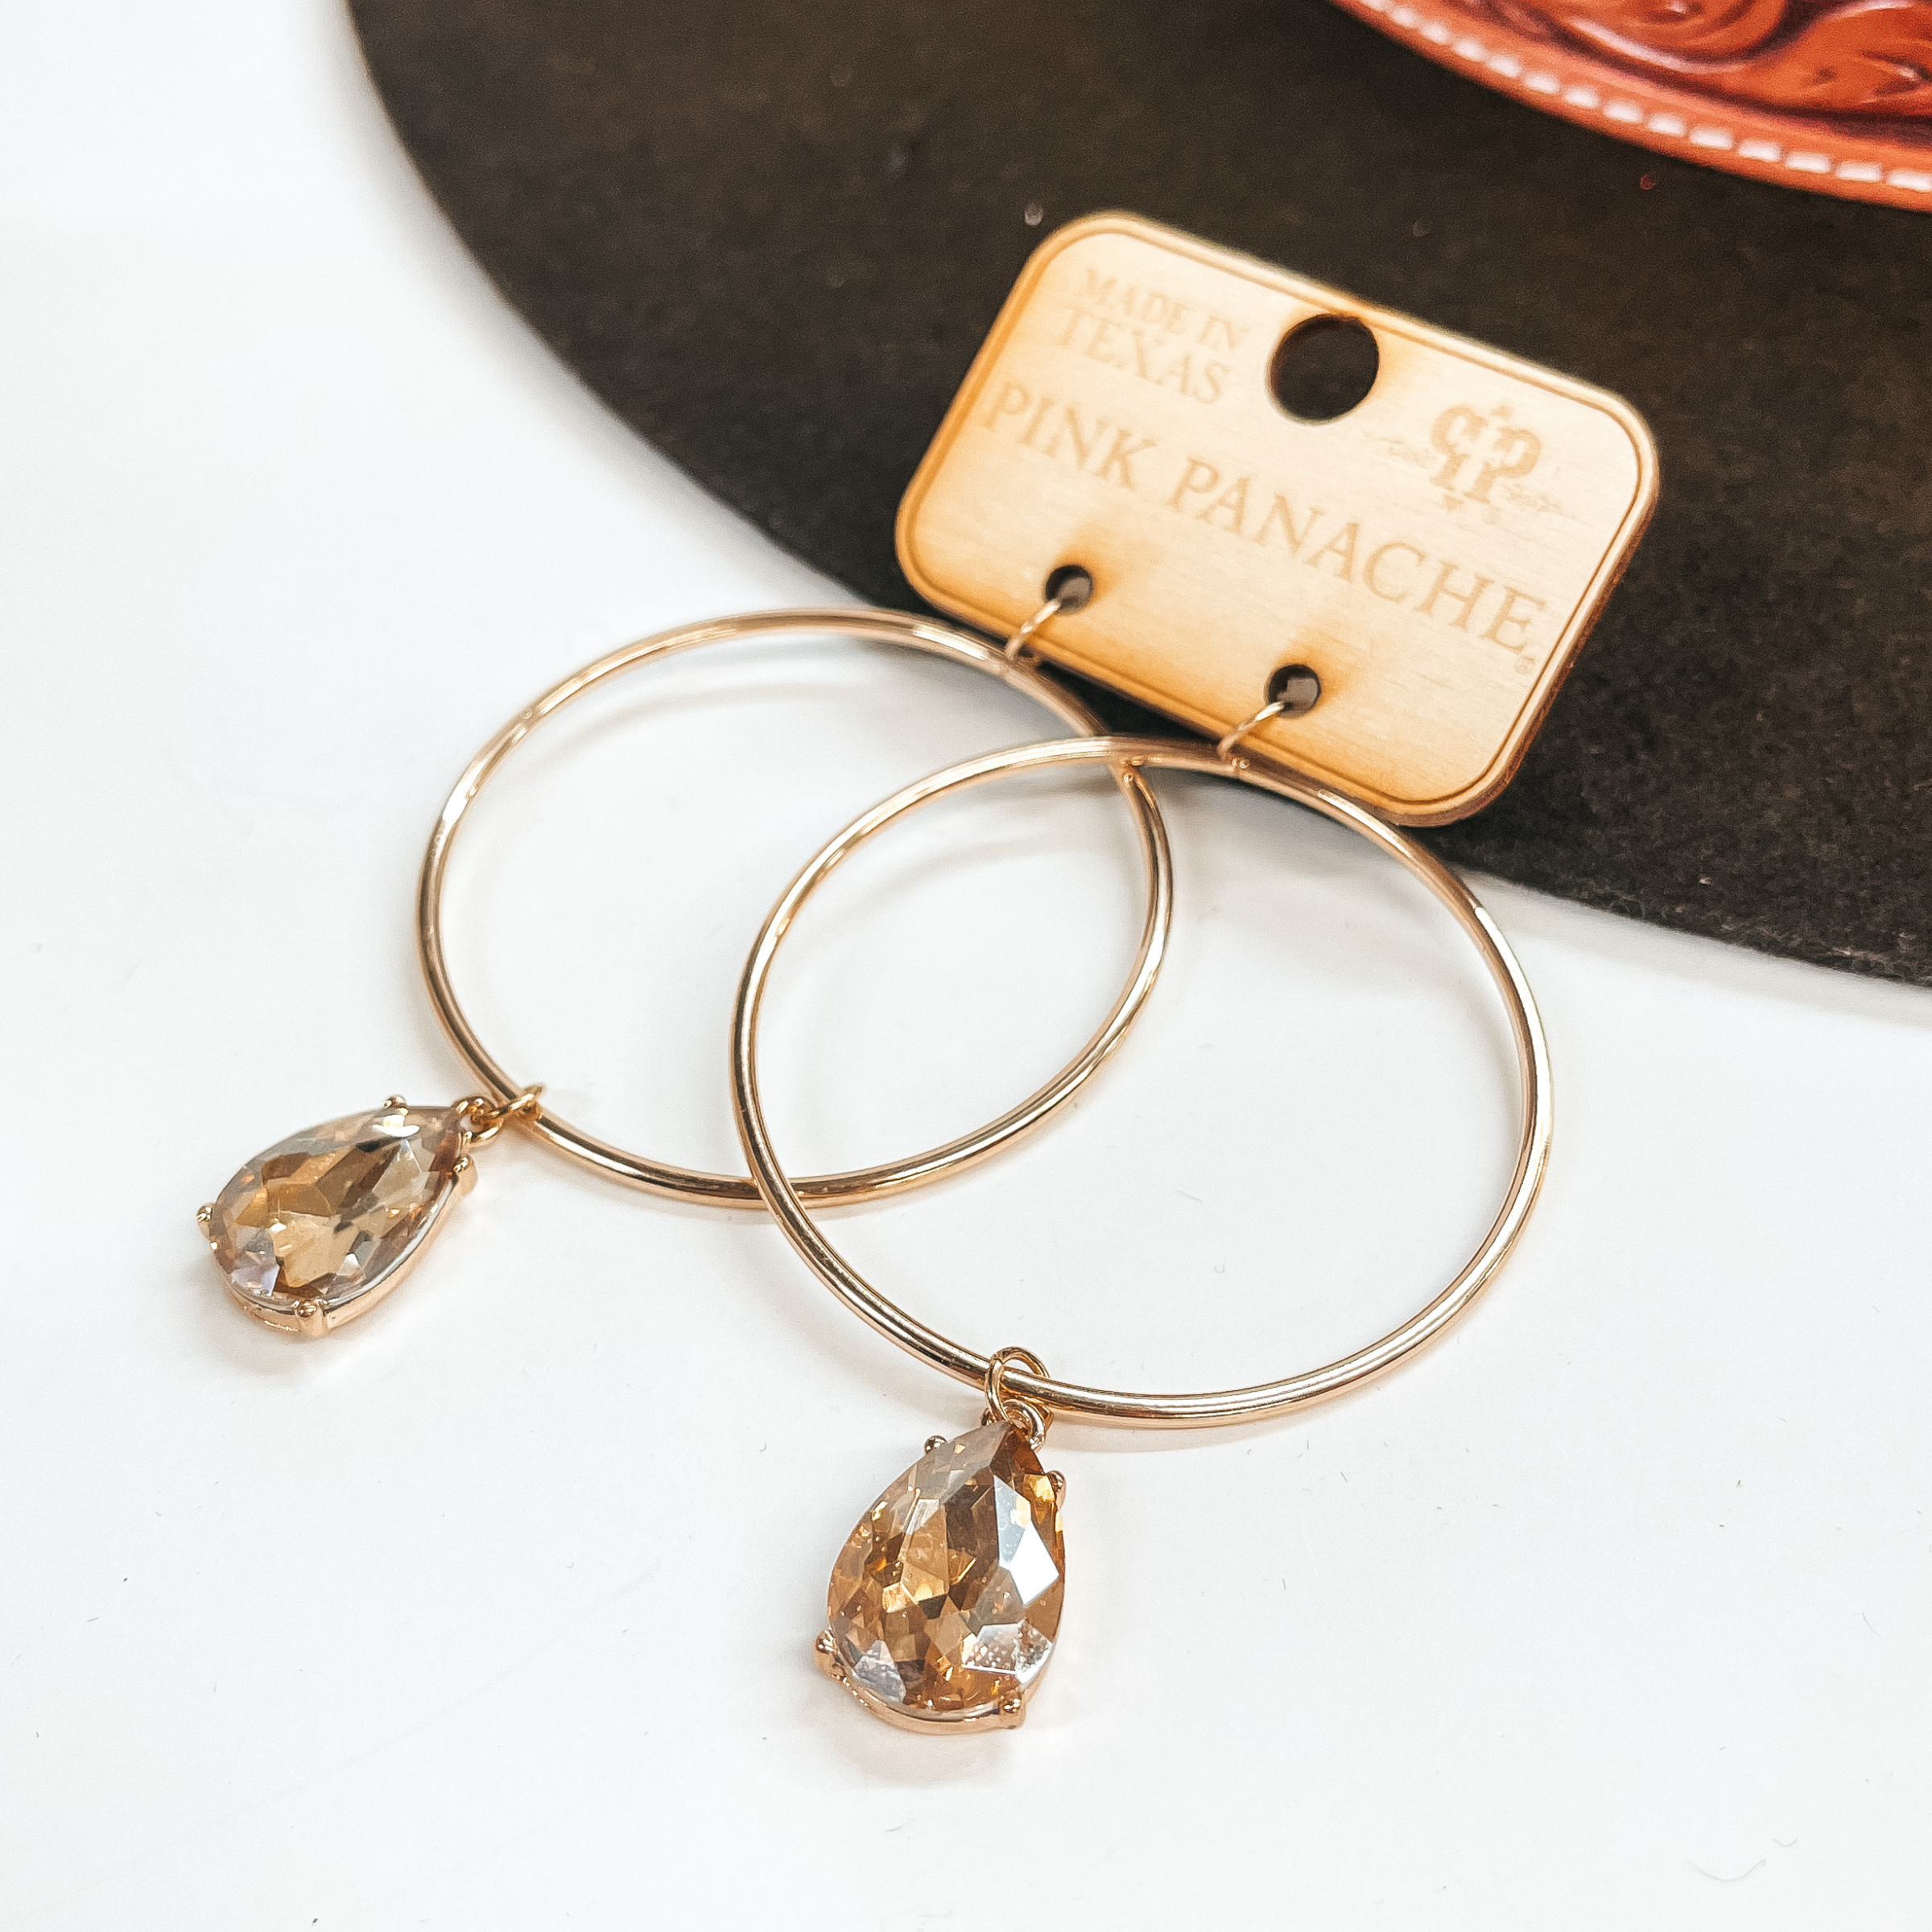 Fish hook gold hoop earrings with a light silk  teardrop shaped crystal pendant in the center.  Taken on a white  and leaning against a dark brown hat.